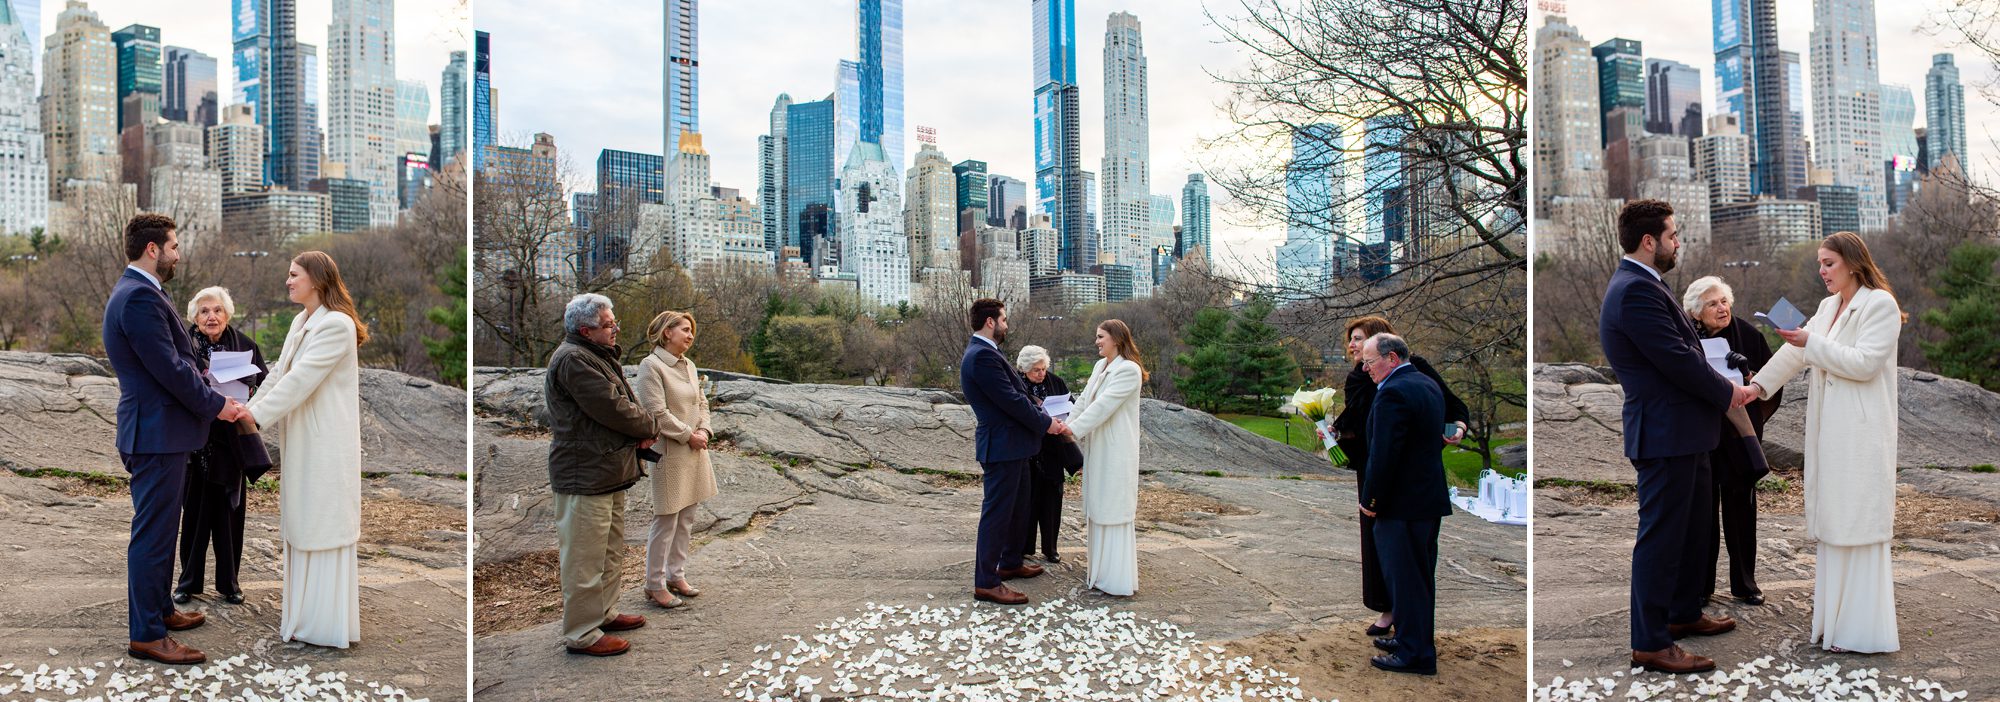 Wedding Ceremony Locations in Central Park 